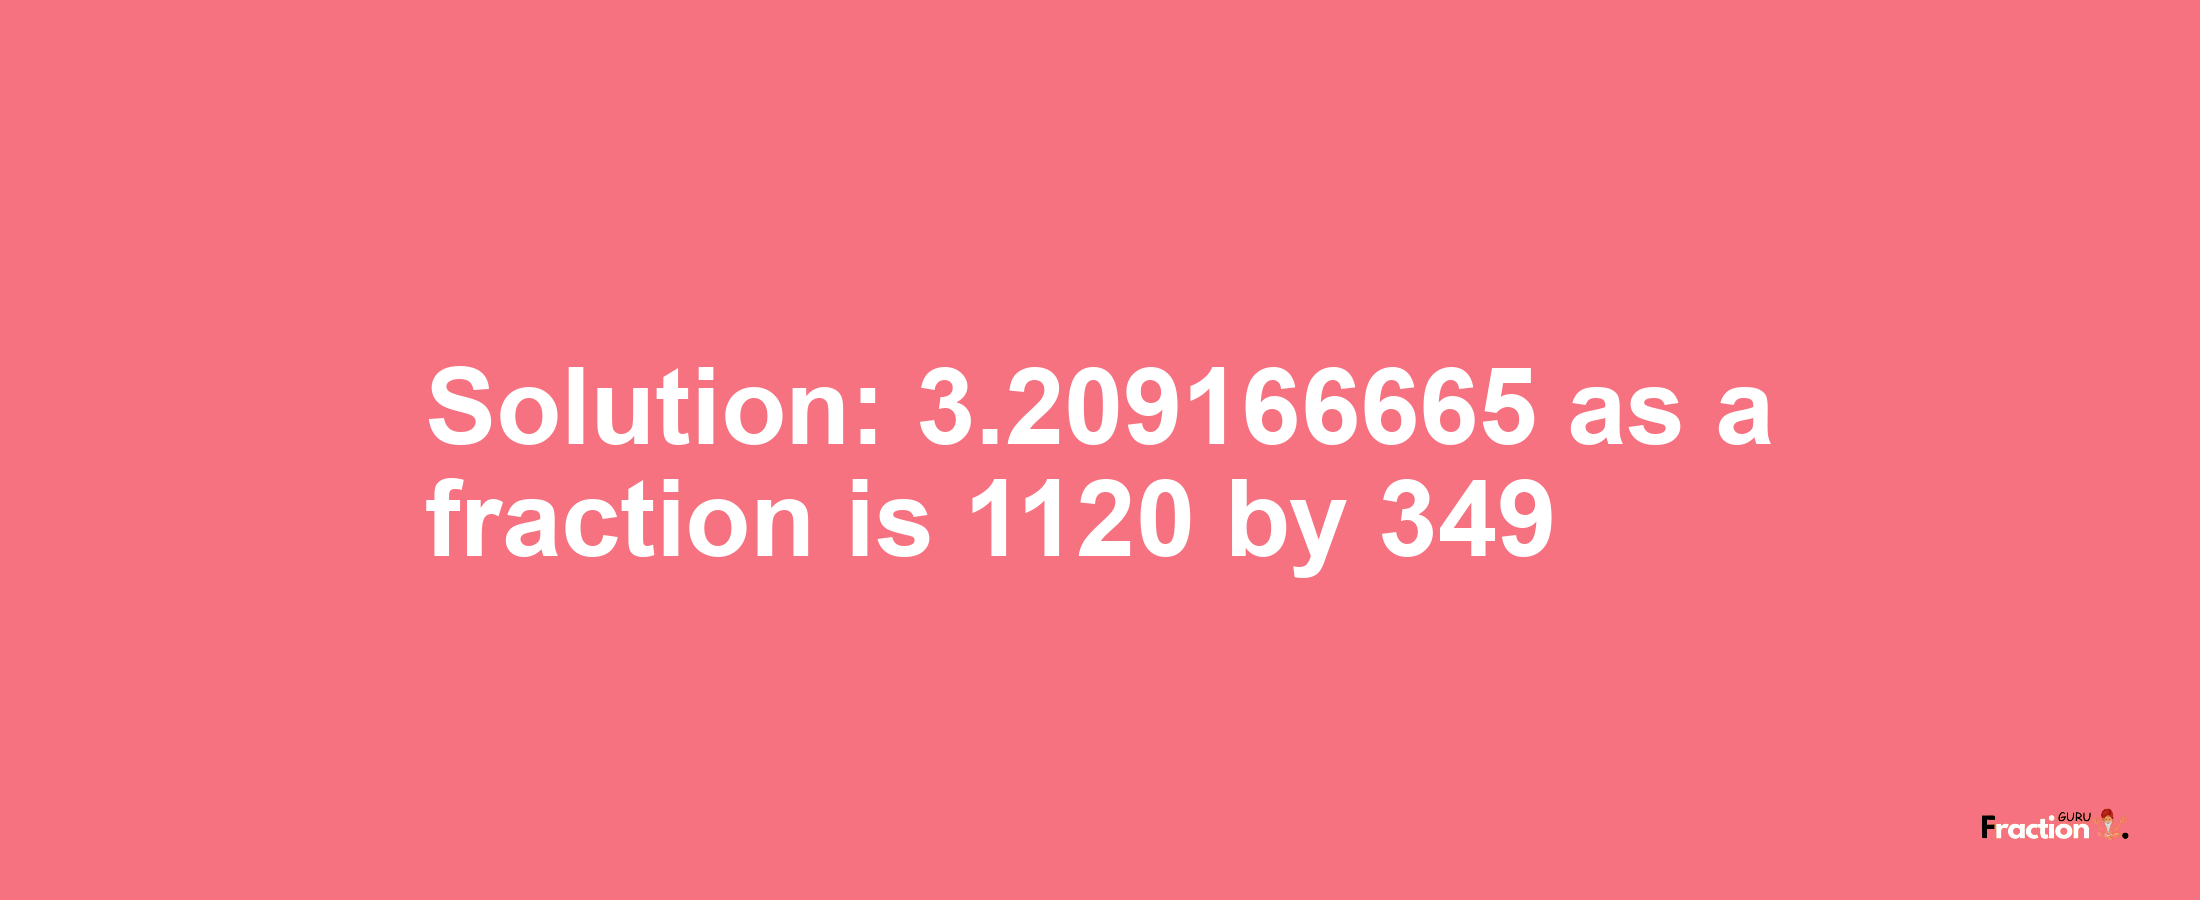 Solution:3.209166665 as a fraction is 1120/349